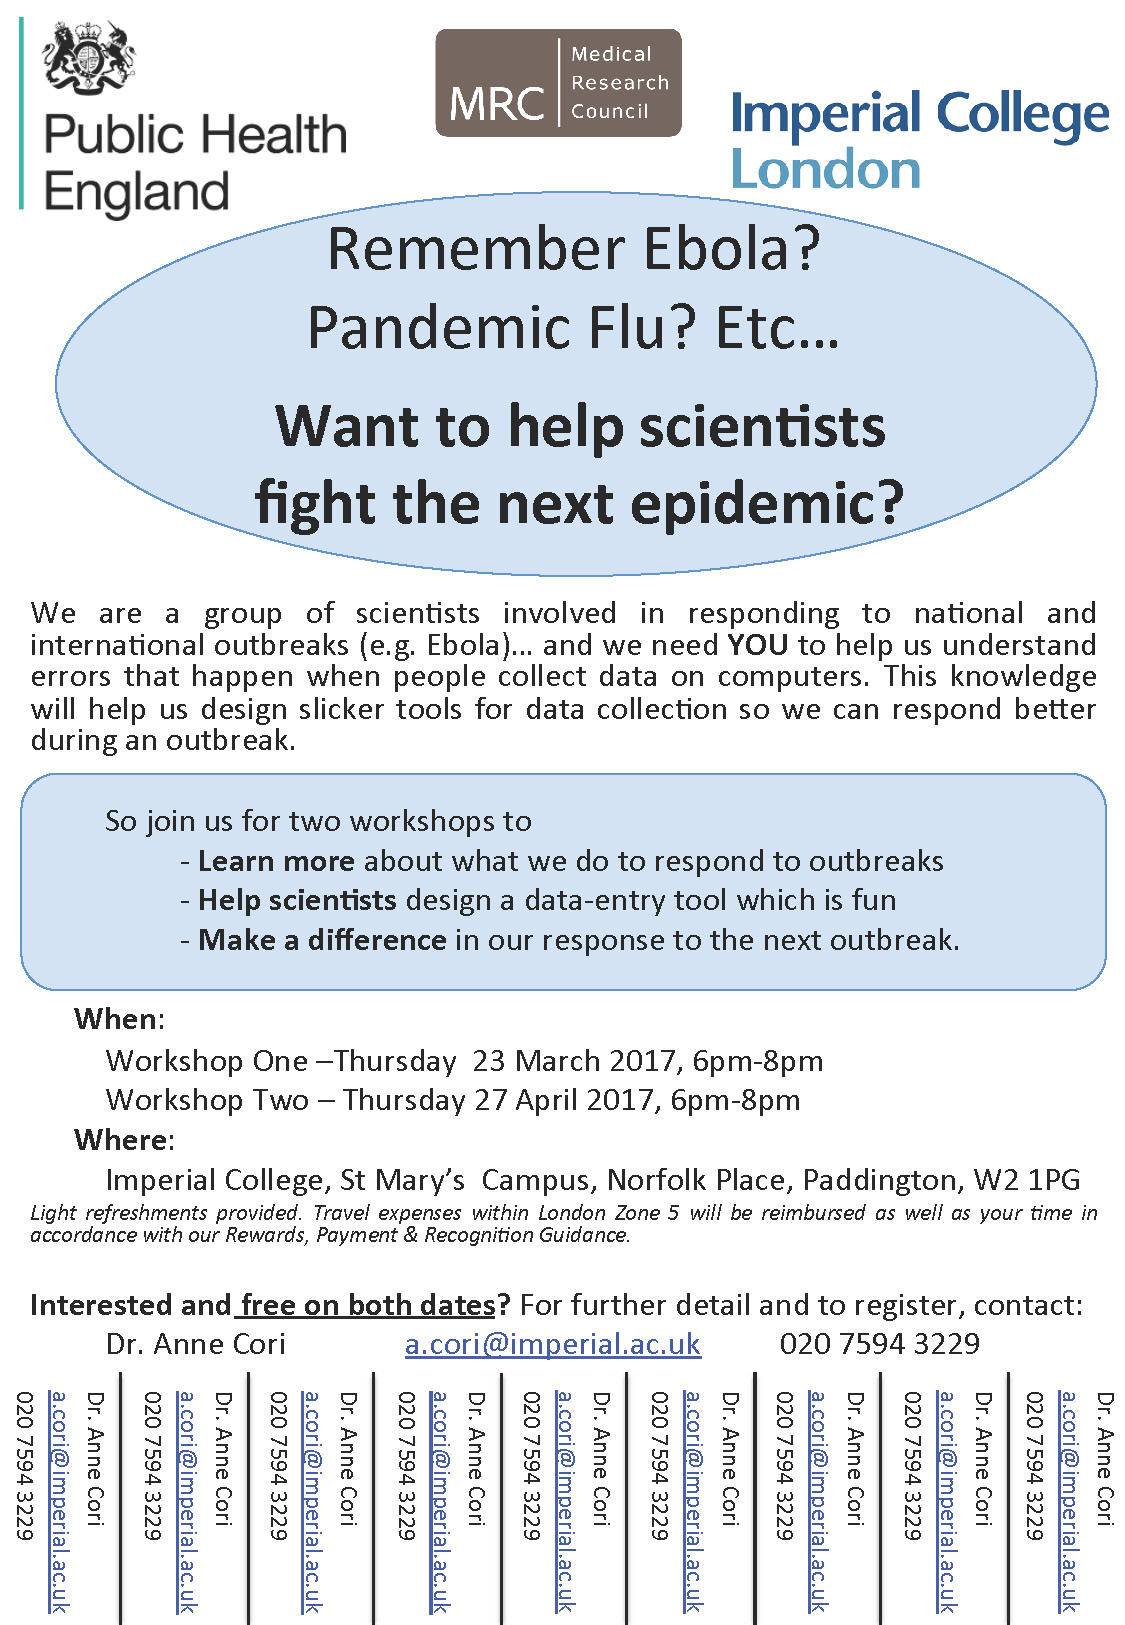 Remember Ebola? Pandemic Flu? Etc…  We are a group of scientists involved in responding to national and international outbreaks (e.g. Ebola)… and we need YOU to help us understand errors that happen when people collect data on computers. This knowledge will help us design slicker tools for data collection so we can respond better during an outbreak.  So join us for two workshops to - Learn more about what we do to respond to outbreaks - Help scientists design a data-entry tool which is fun - Make a difference in our response to the next outbreak.  When: Workshop One –Thursday 23 March 2017, 6pm-8pm Workshop Two – Thursday 27 April 2017, 6pm-8pm  Where: Imperial College, St Mary’s Campus, Norfolk Place, Paddington, W2 1PG  Light refreshments provided. Travel expenses within London Zone 5 will be reimbursed as well as your time in accordance with our Rewards, Payment & Recognition Guidance.  Interested and free on both dates? For further detail and to register, contact: Dr. Anne Cori : a.cori@imperial.ac.uk : 020 7594 3229  Medical Research Council : Public Health England : Imperial College London